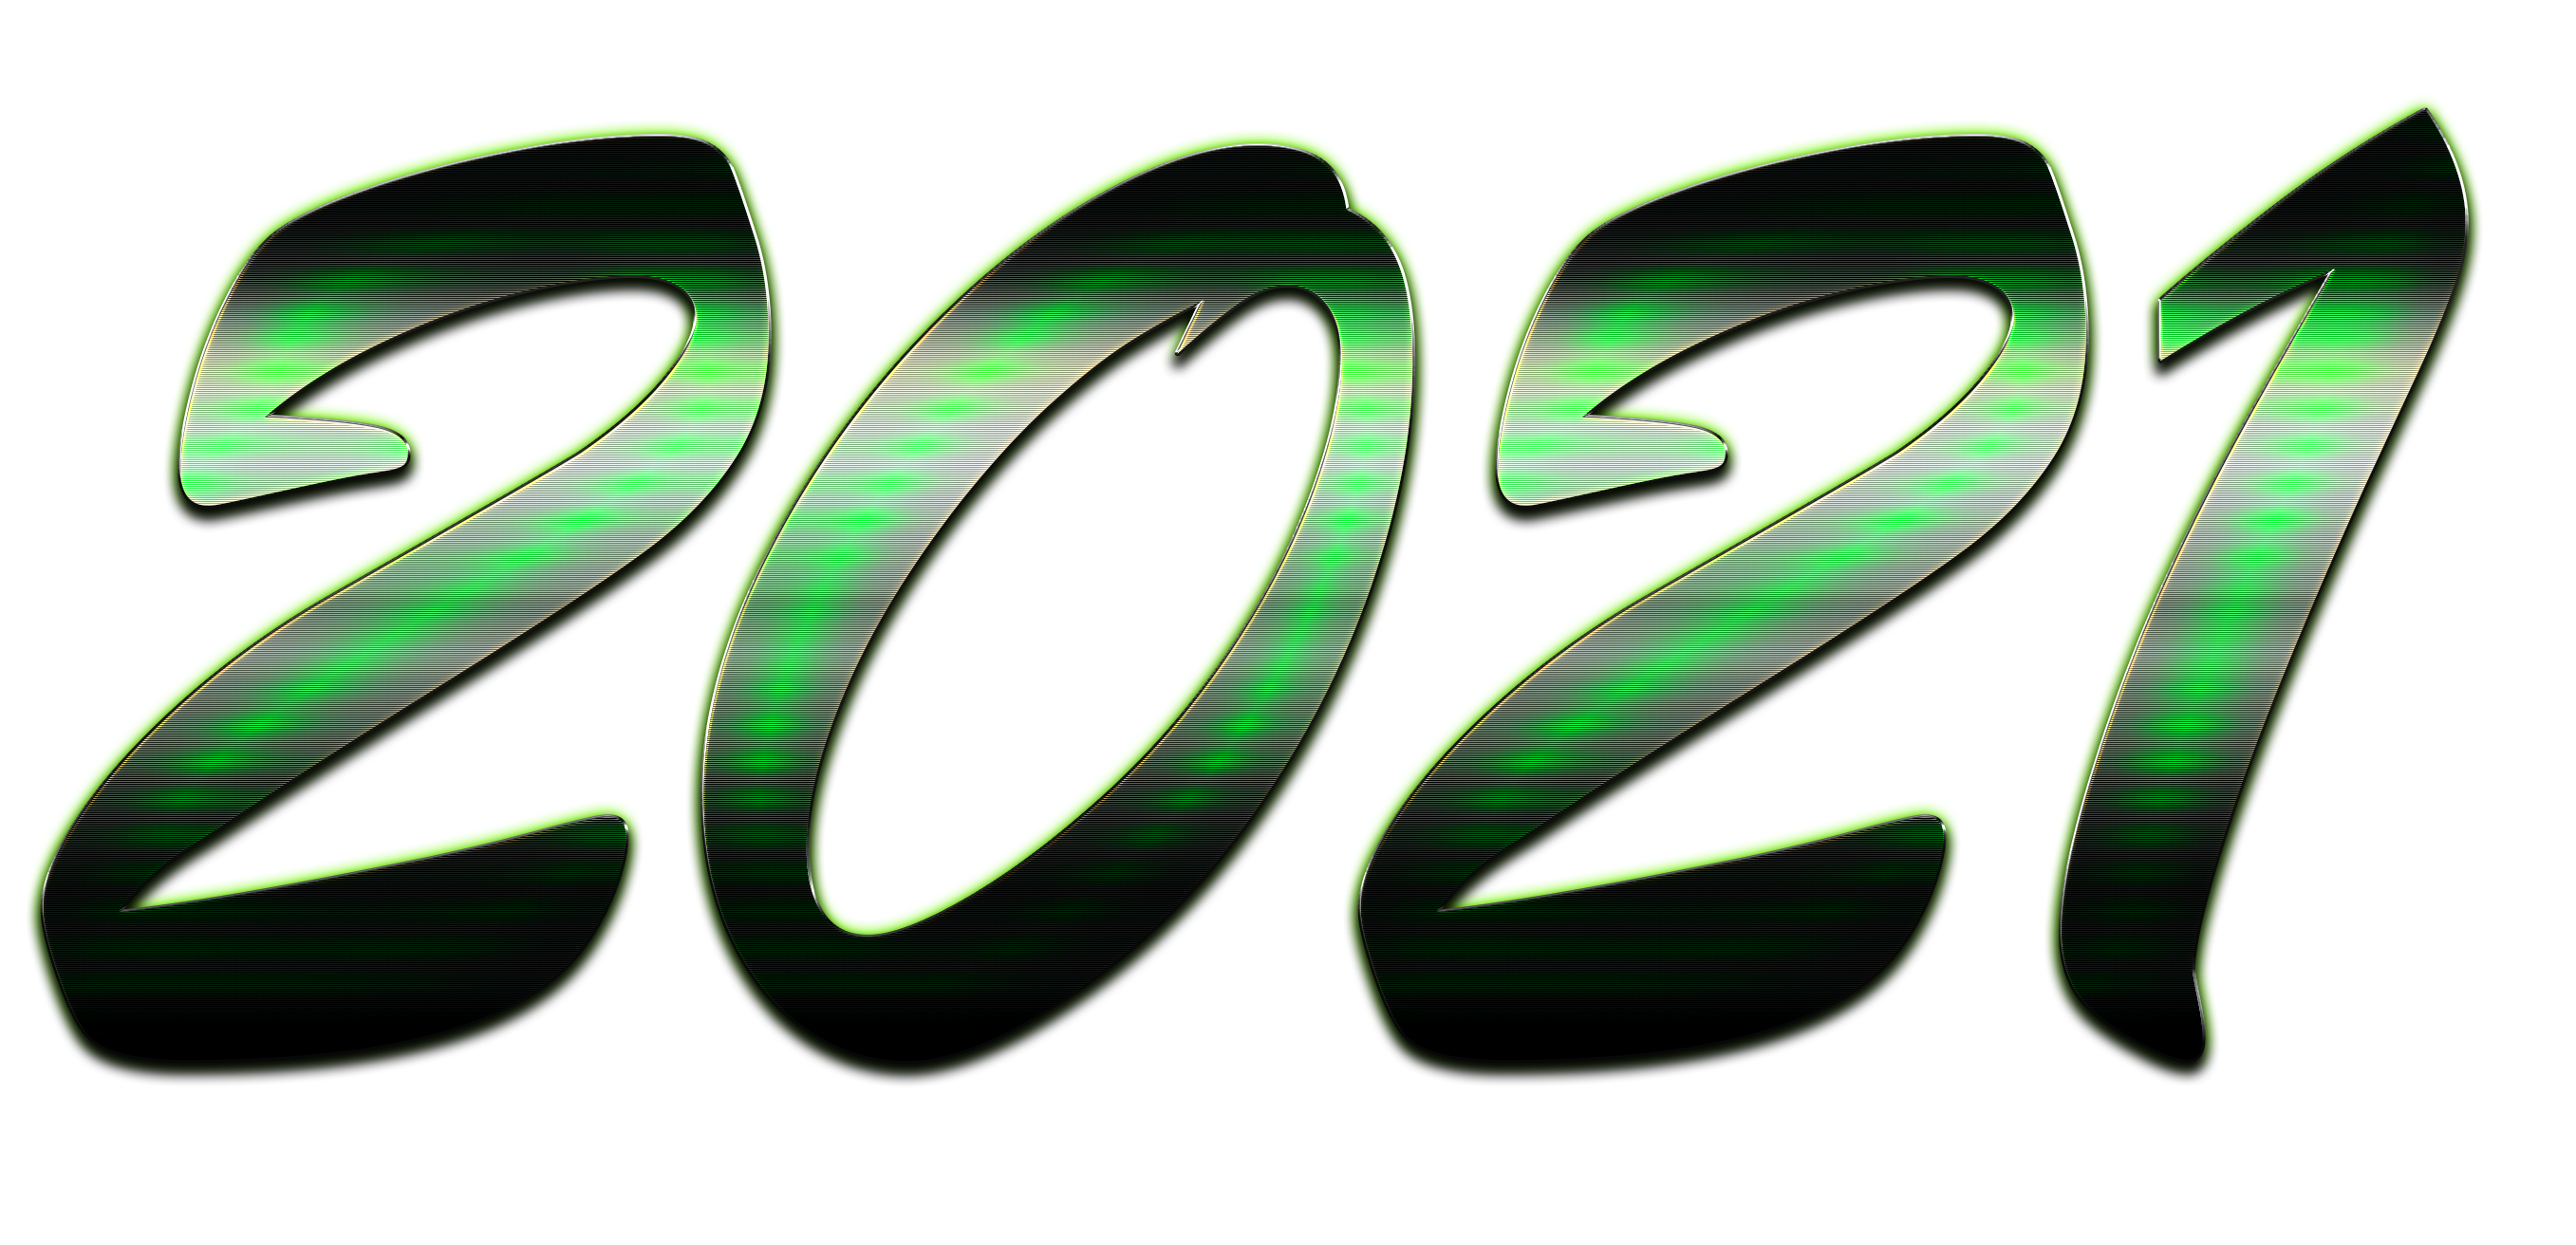 2021 Year PNG Image